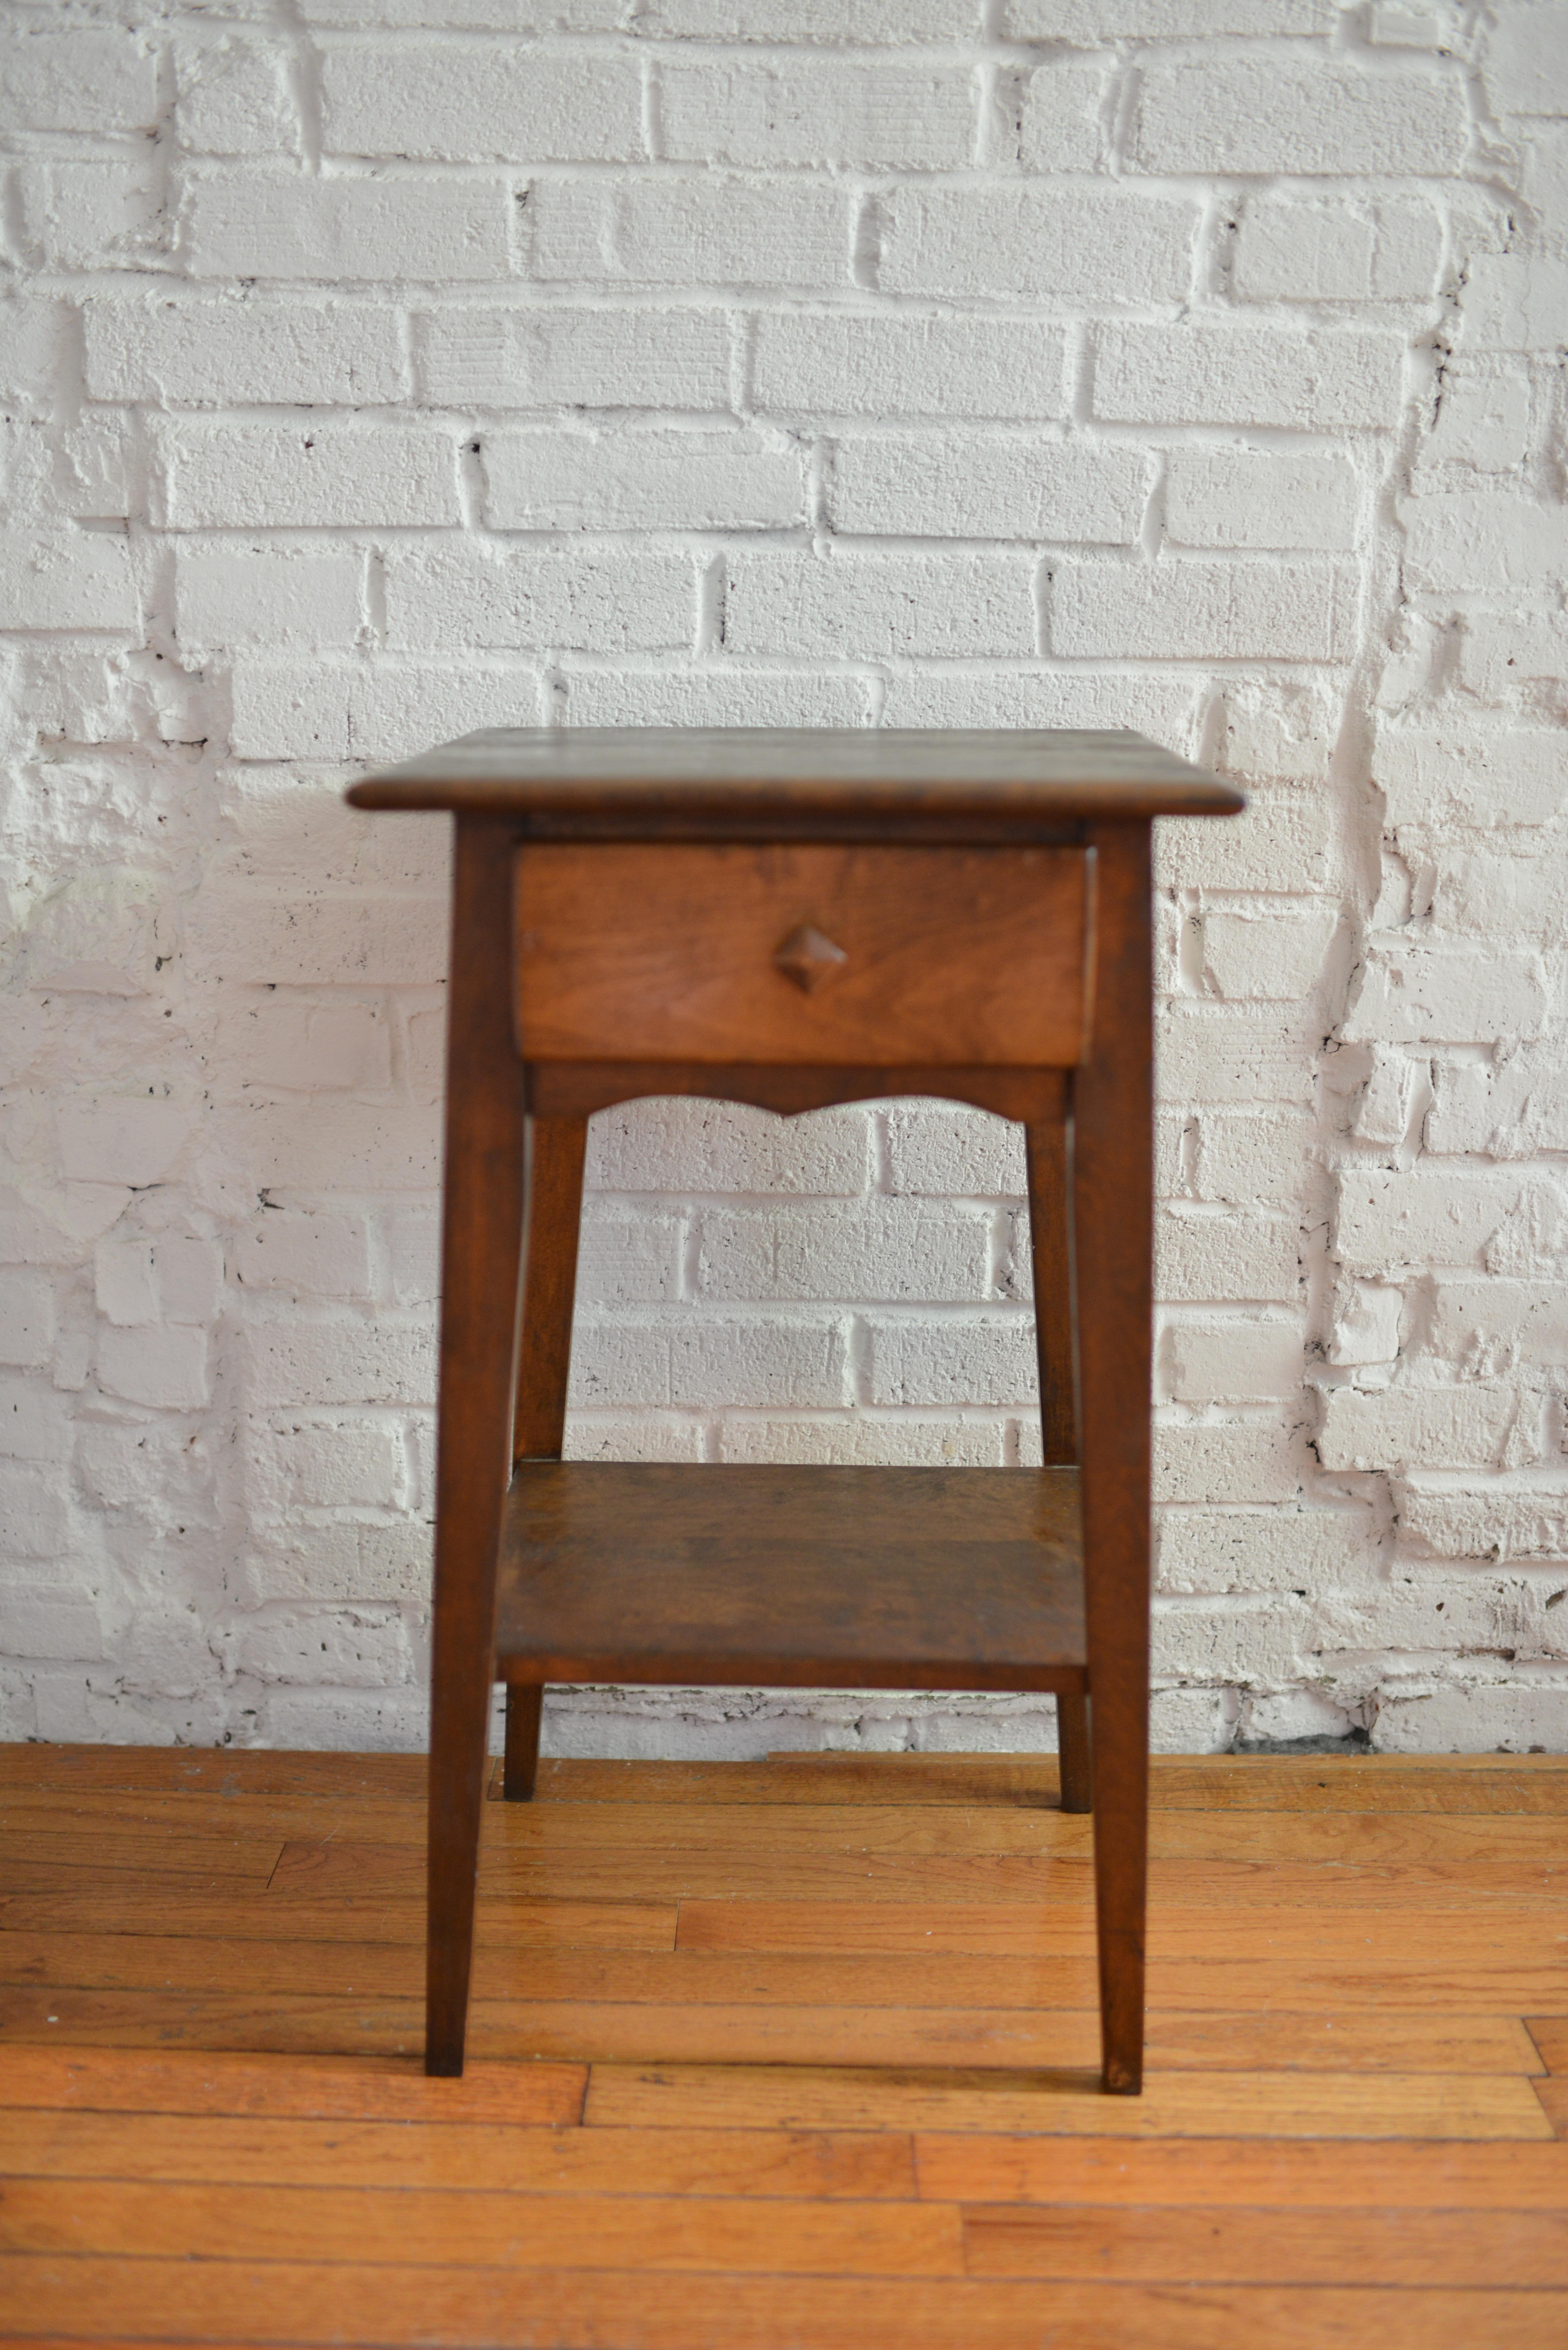 Adorable 19th century walnut side table / end table. This Hepplewhite style table has tapered legs, a single drawer with a shapely apron front and a diamond-shaped wood knob. The top and drawer face feature pretty molded detailing. The square-ish